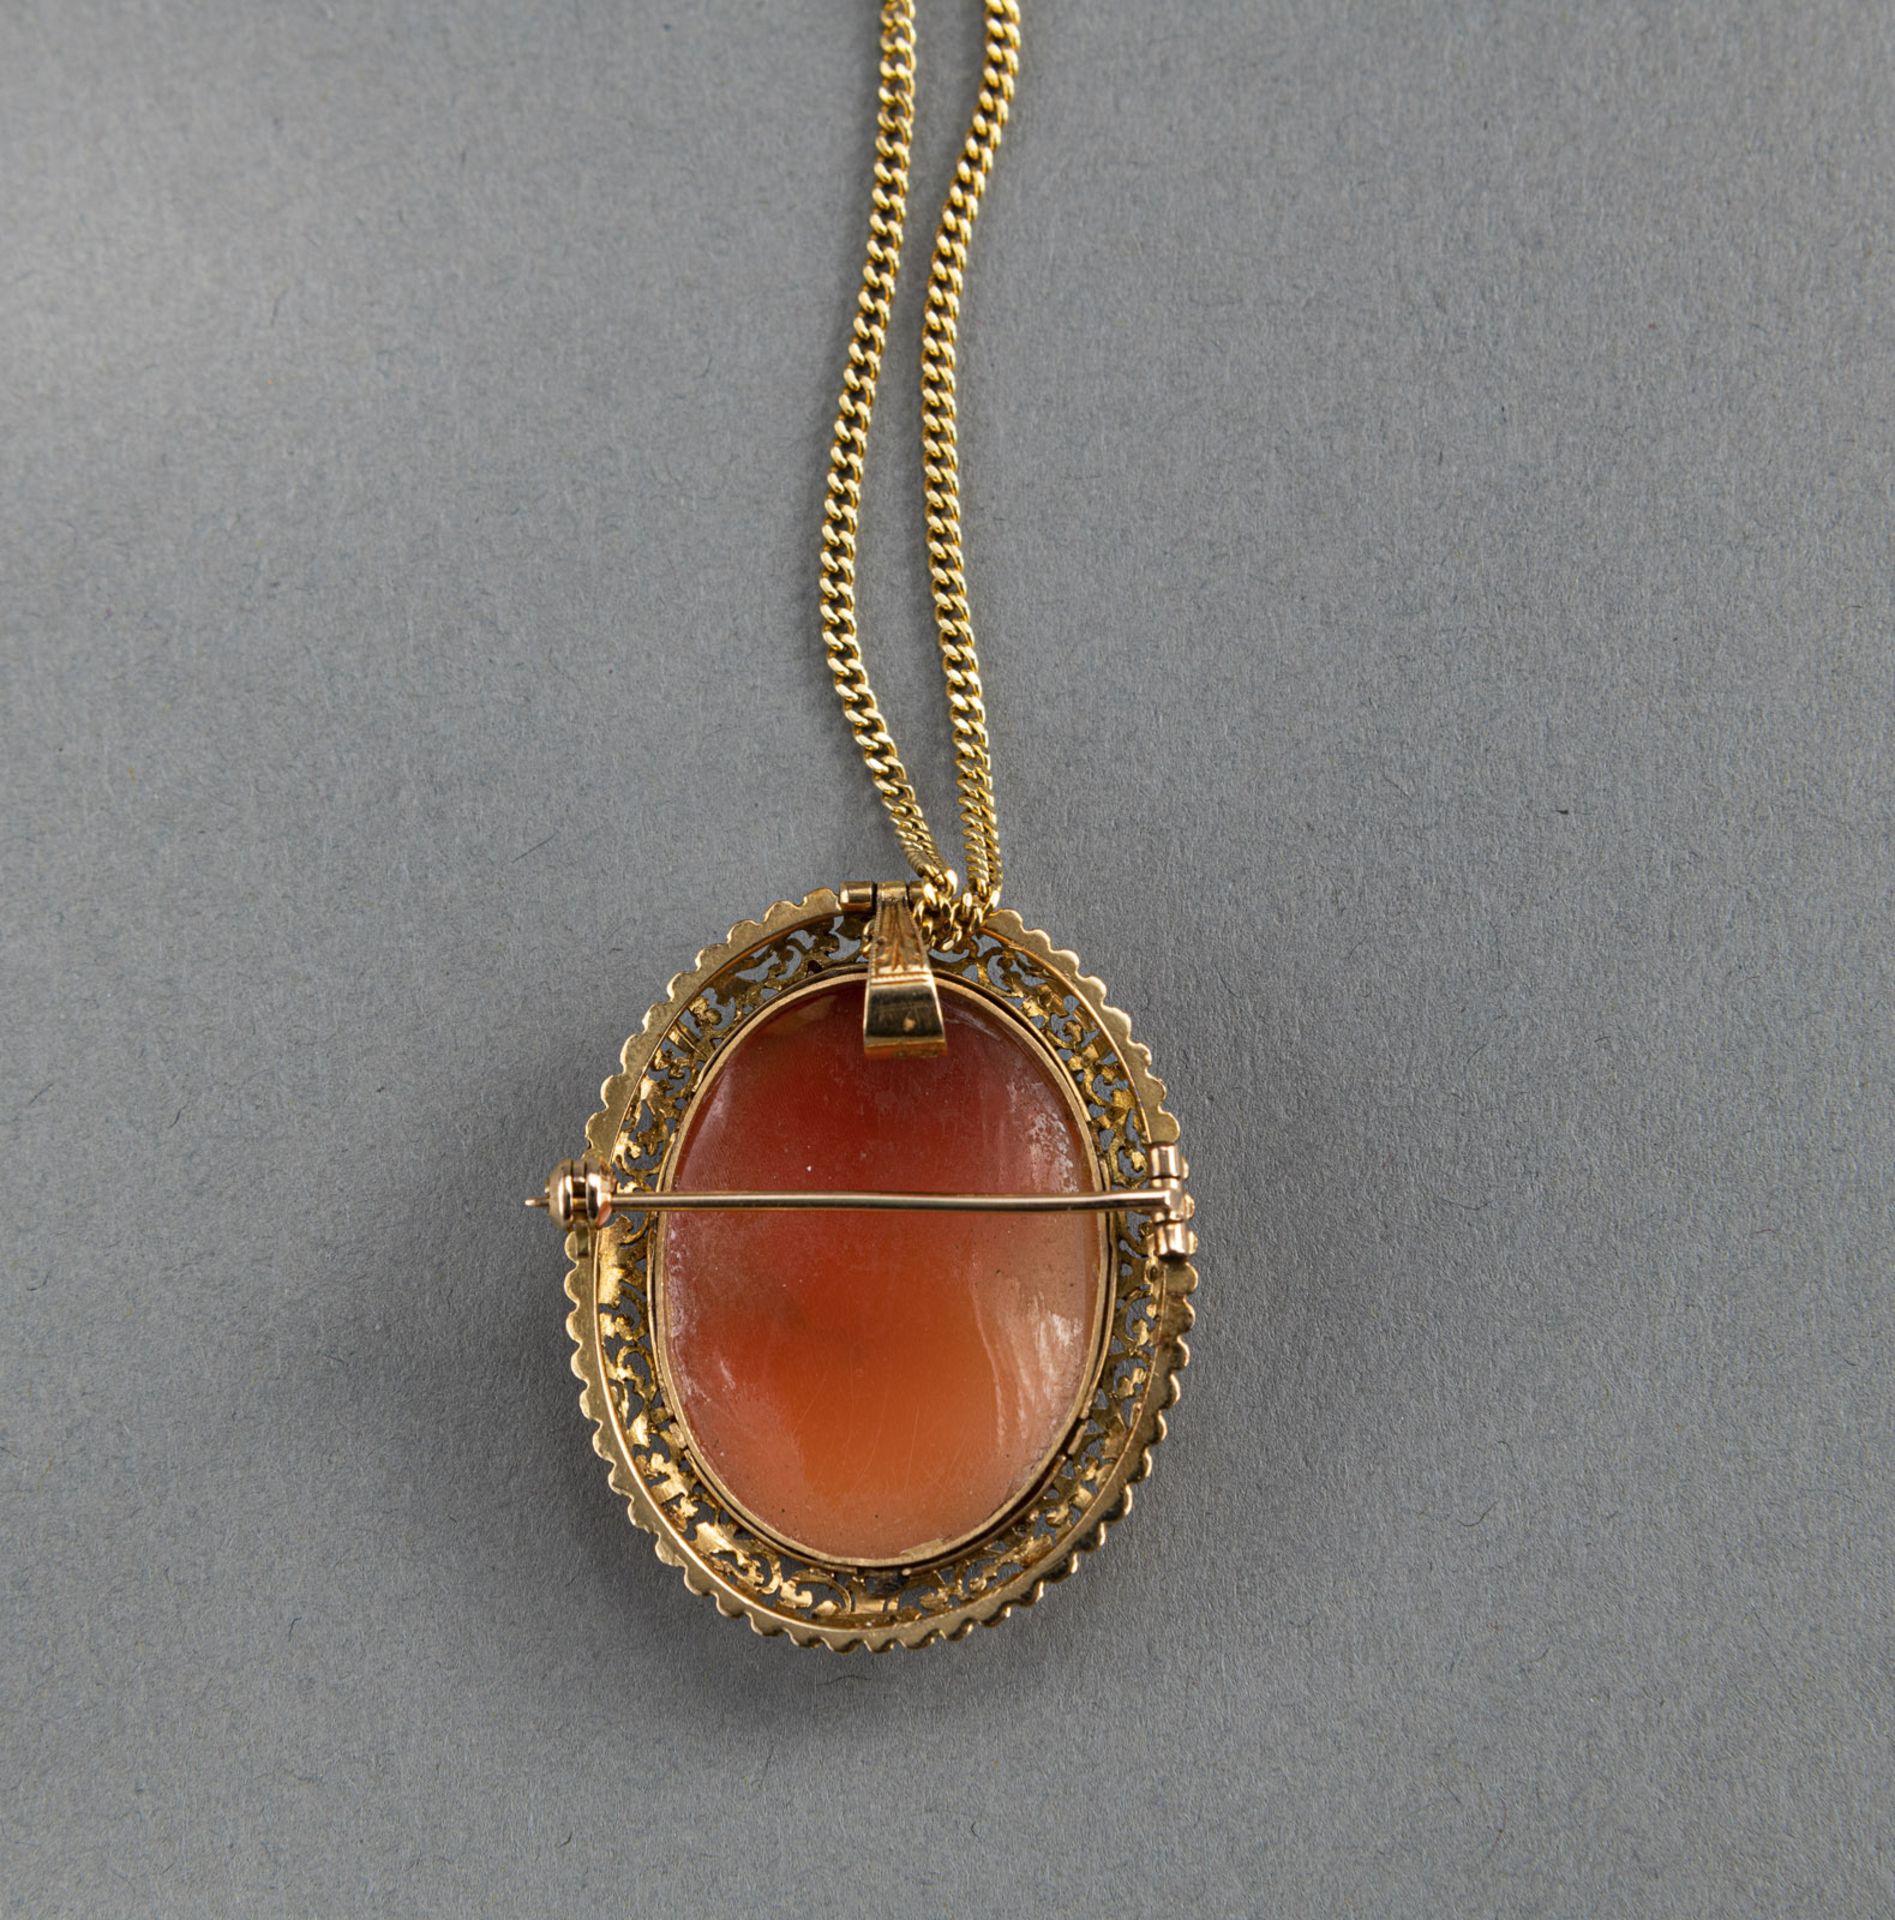 SHELL CAMEO BROOCH AND PENDANT WITH NECKLACE - Image 3 of 6